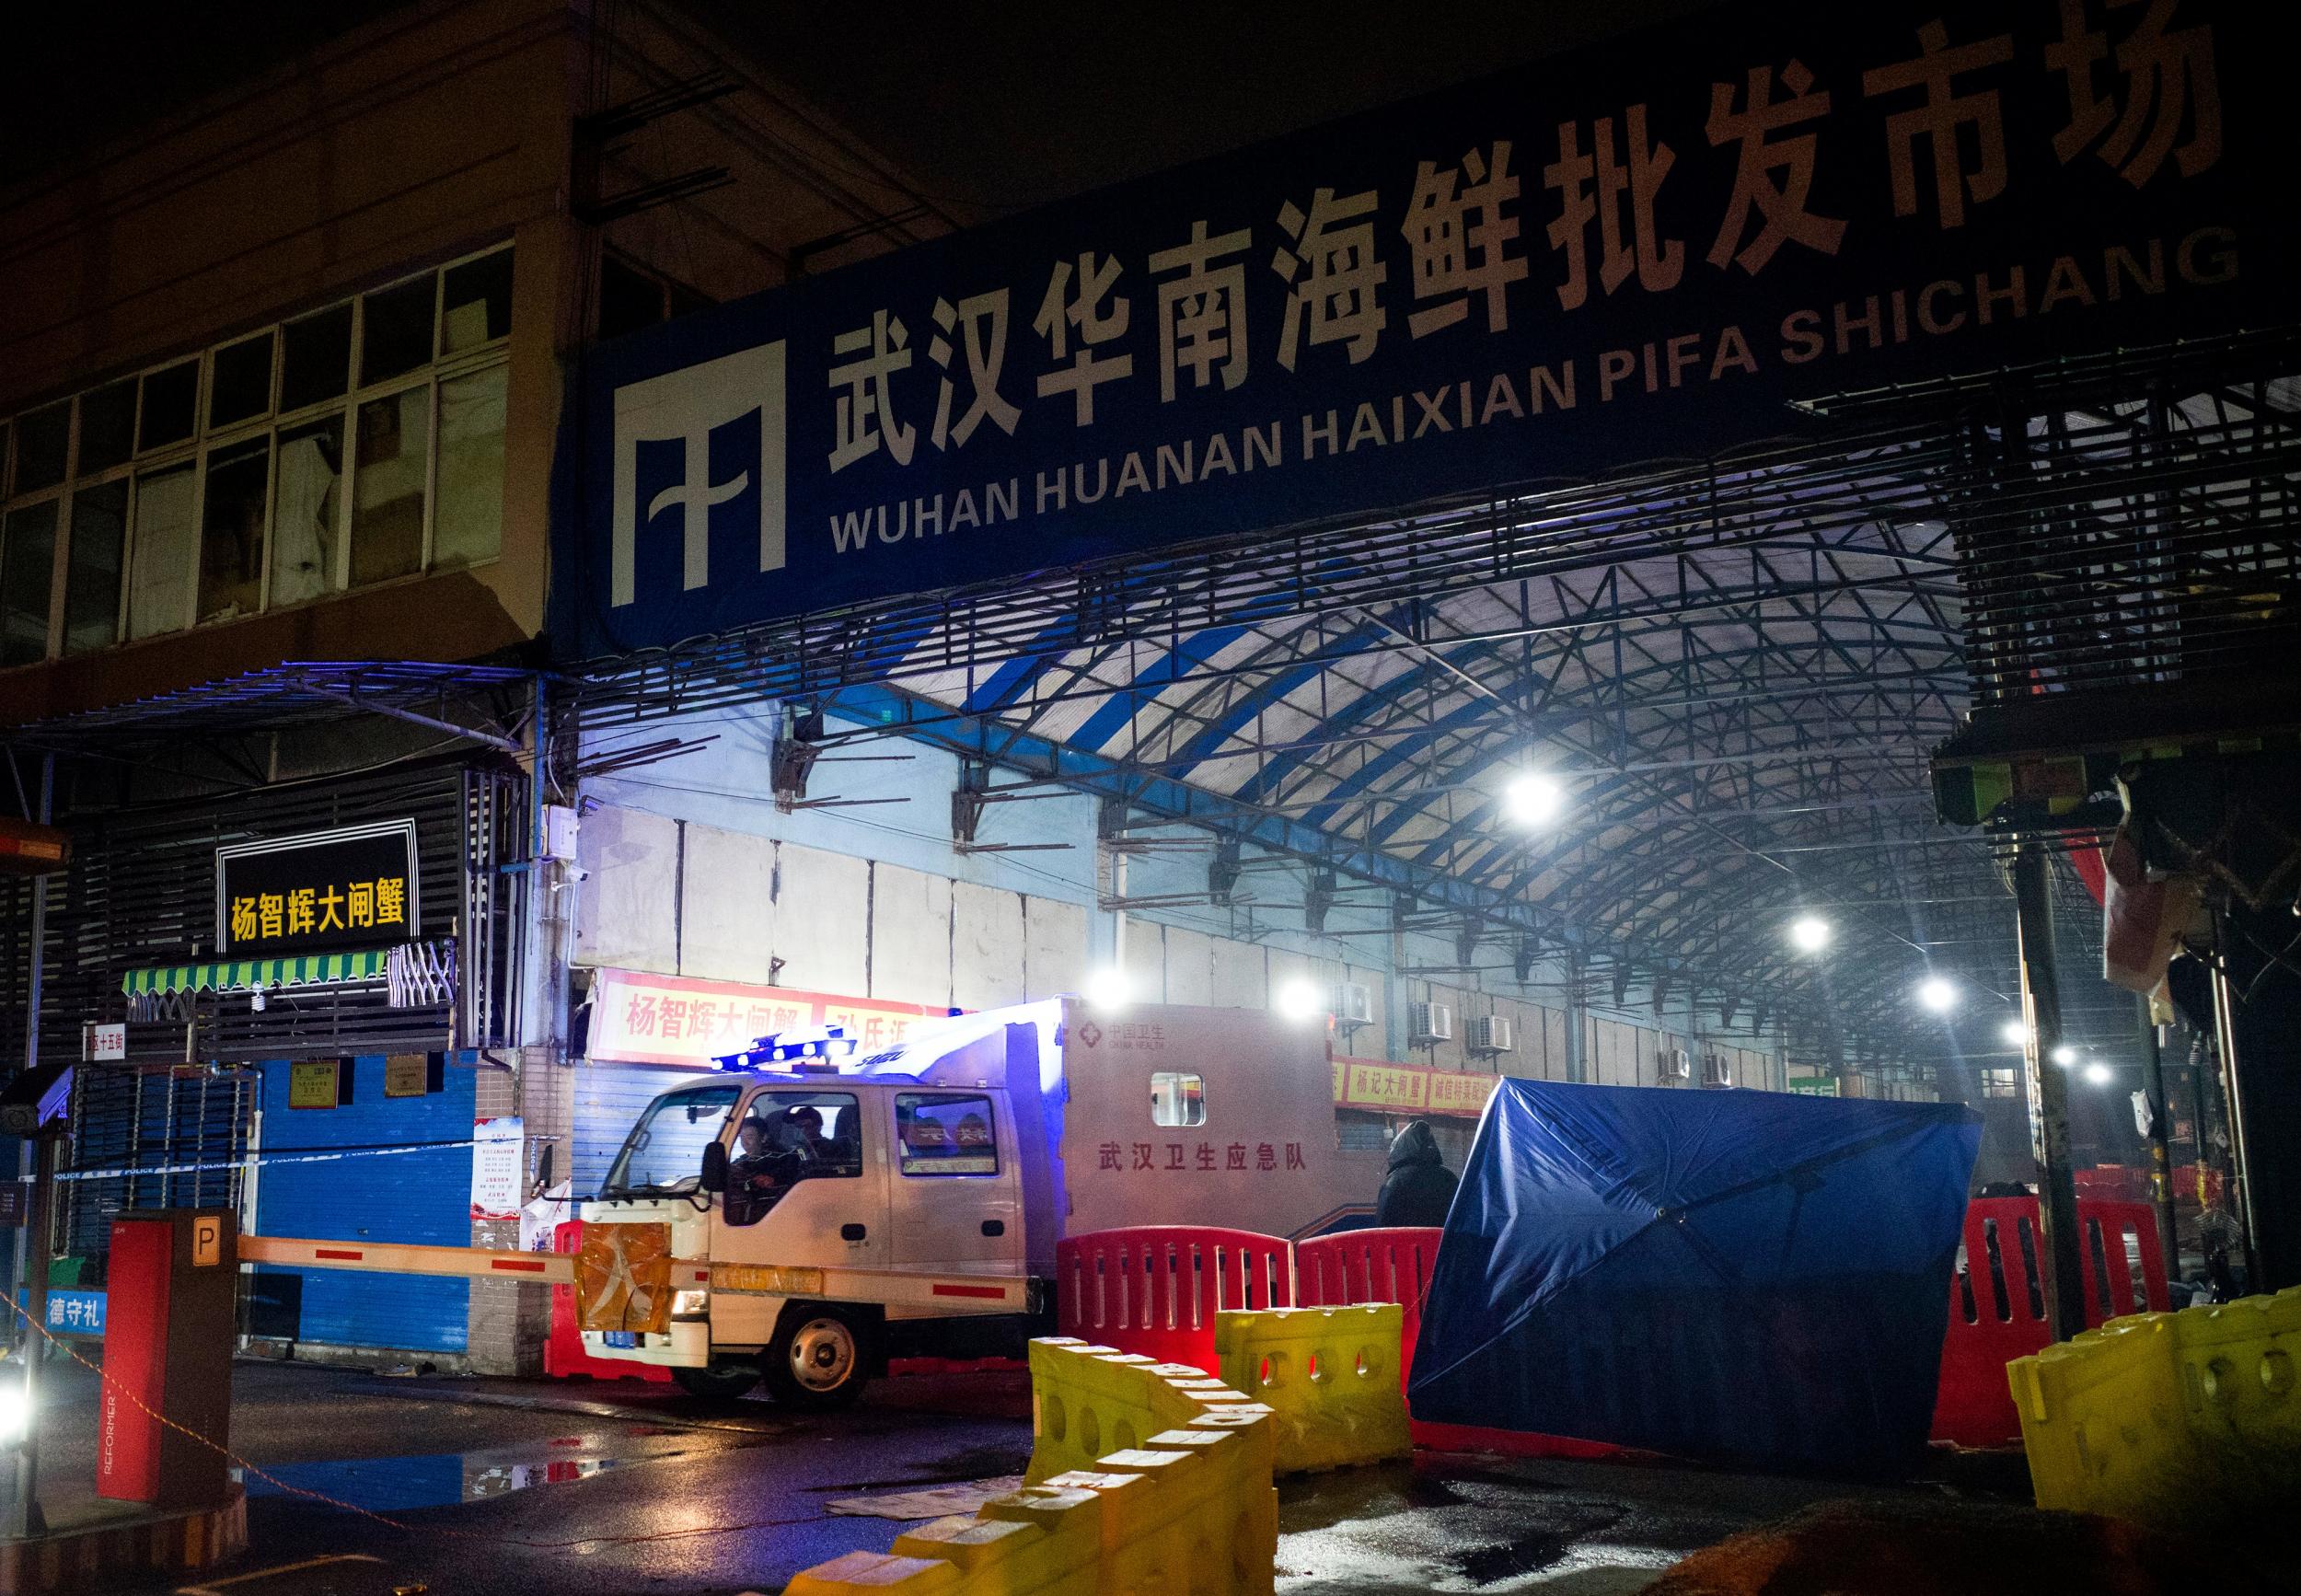 The Wuhan Hygiene Emergency Response Team at the Huanan Seafood Wholesale Market in the city of Wuhan on 11 January 2020